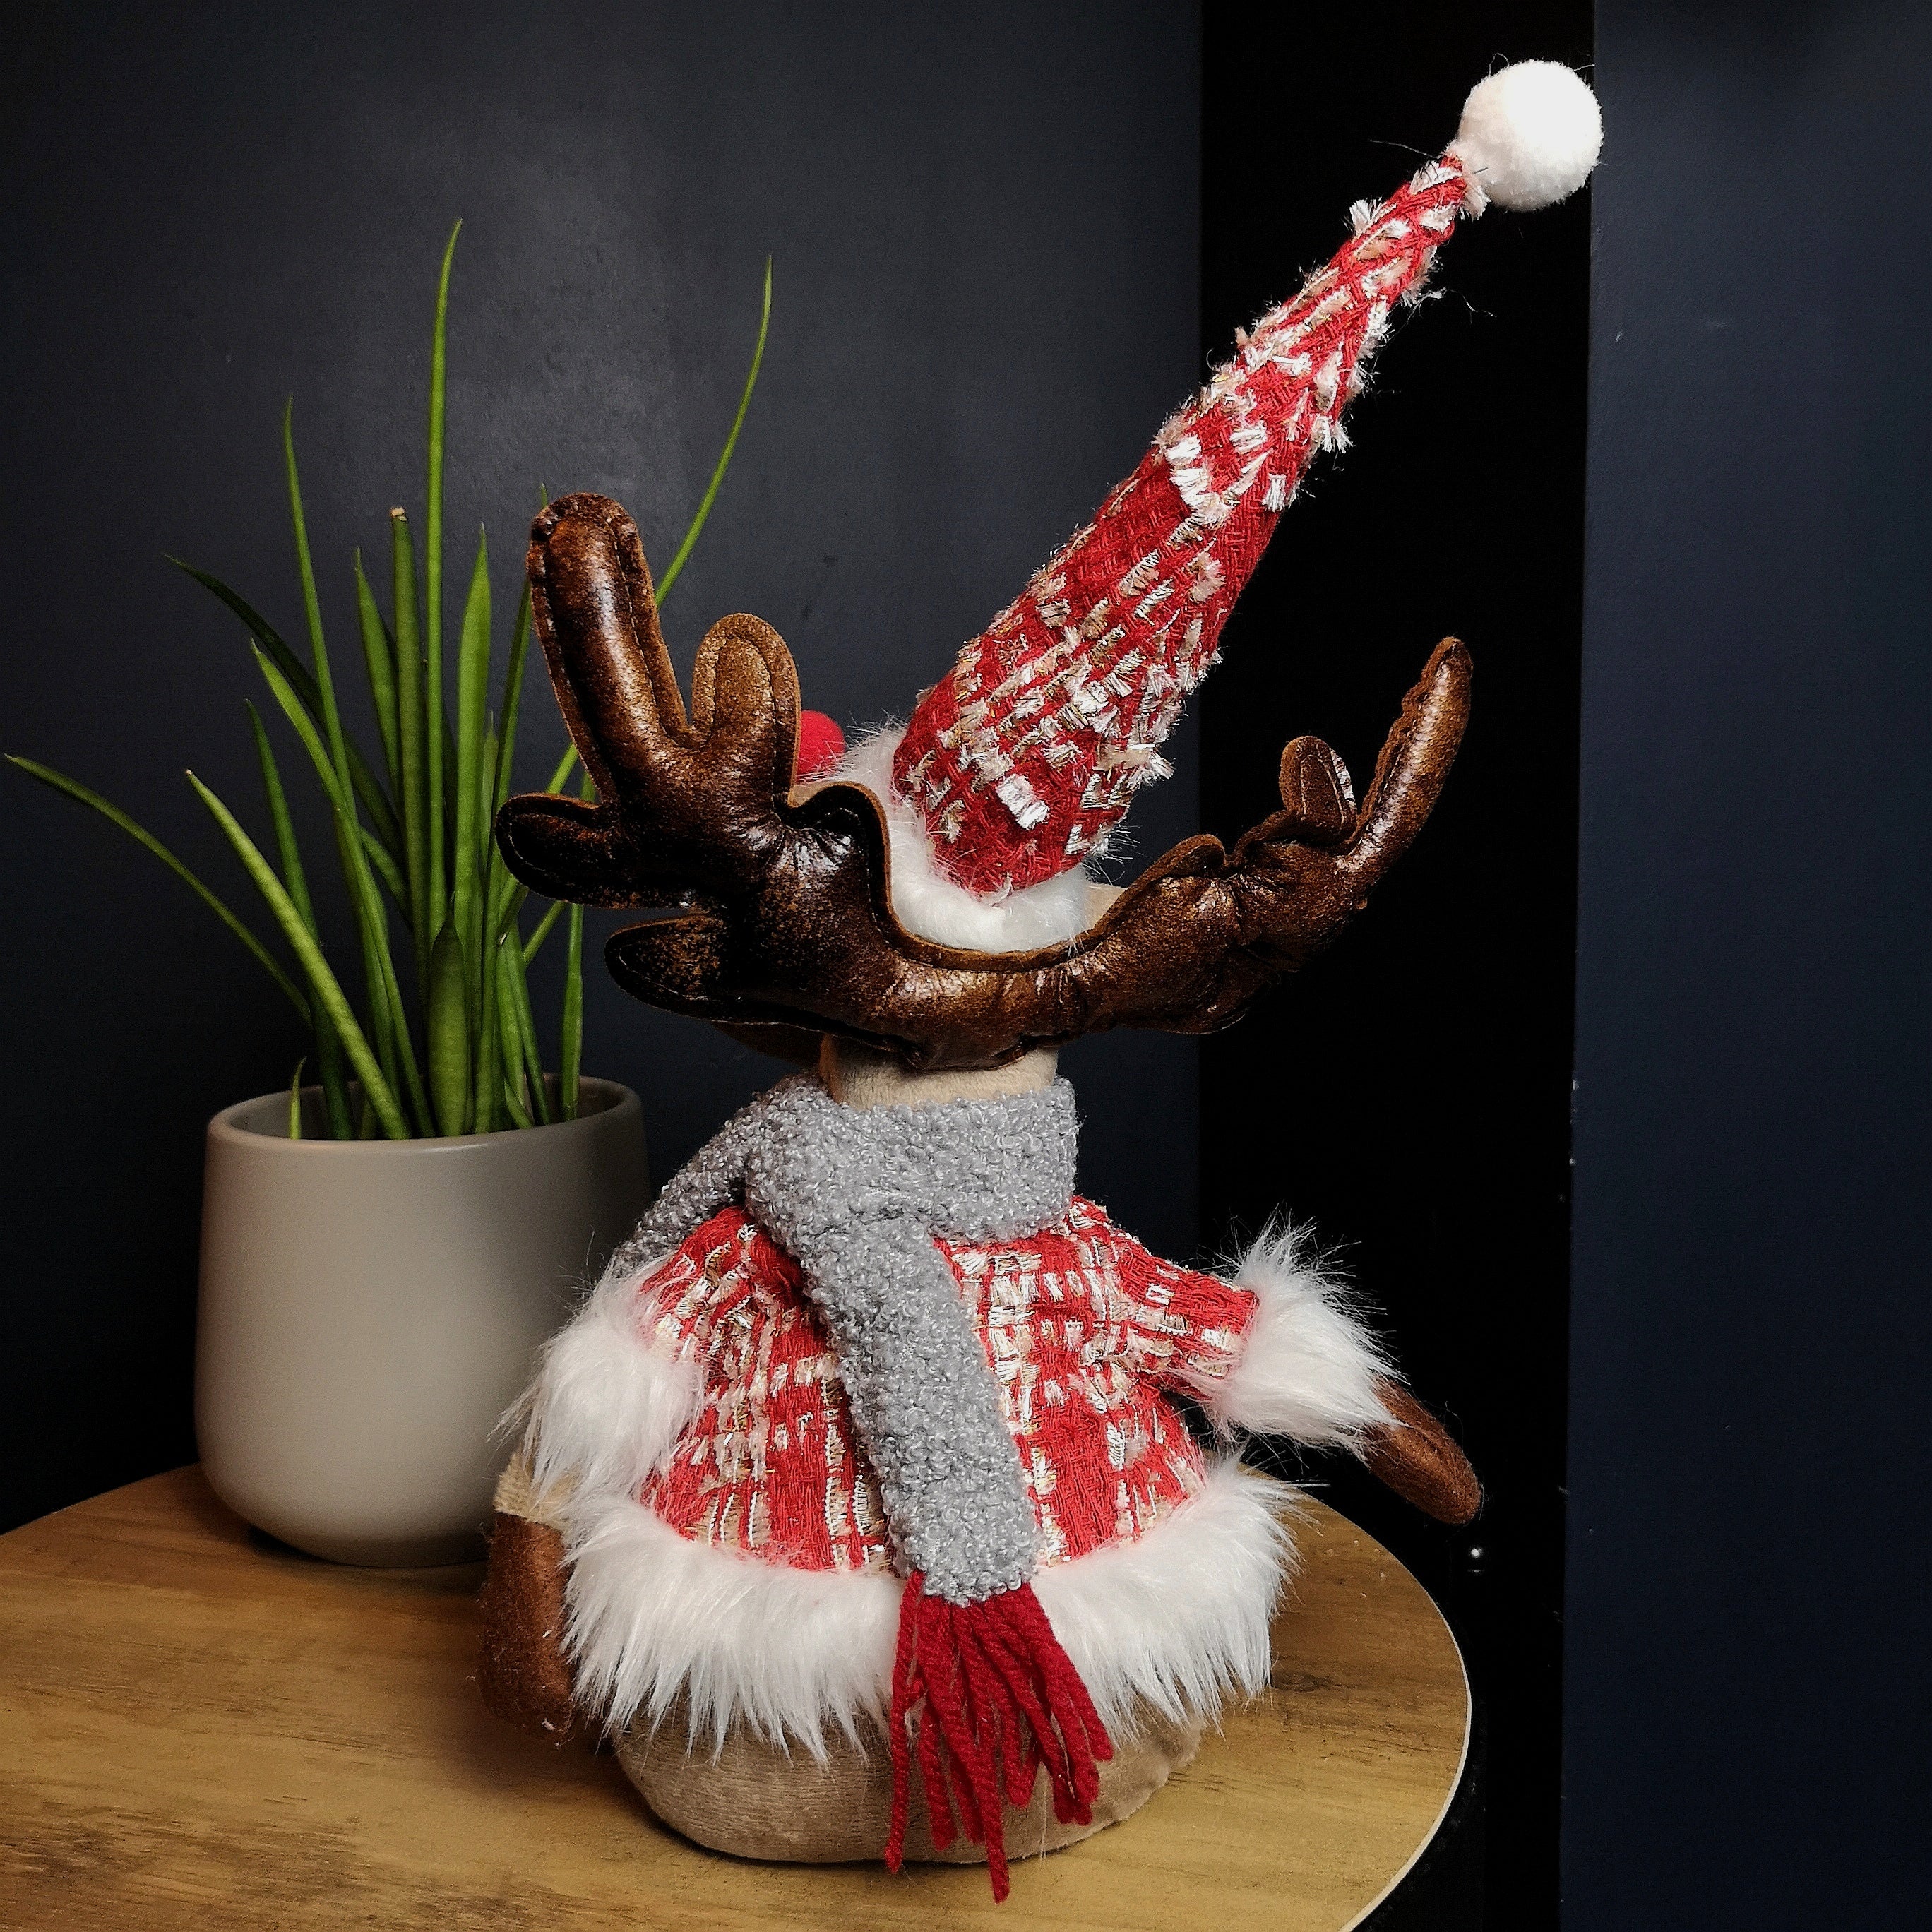 38cm Plush Reindeer Christmas Decoration with Hat and Scarf in Red